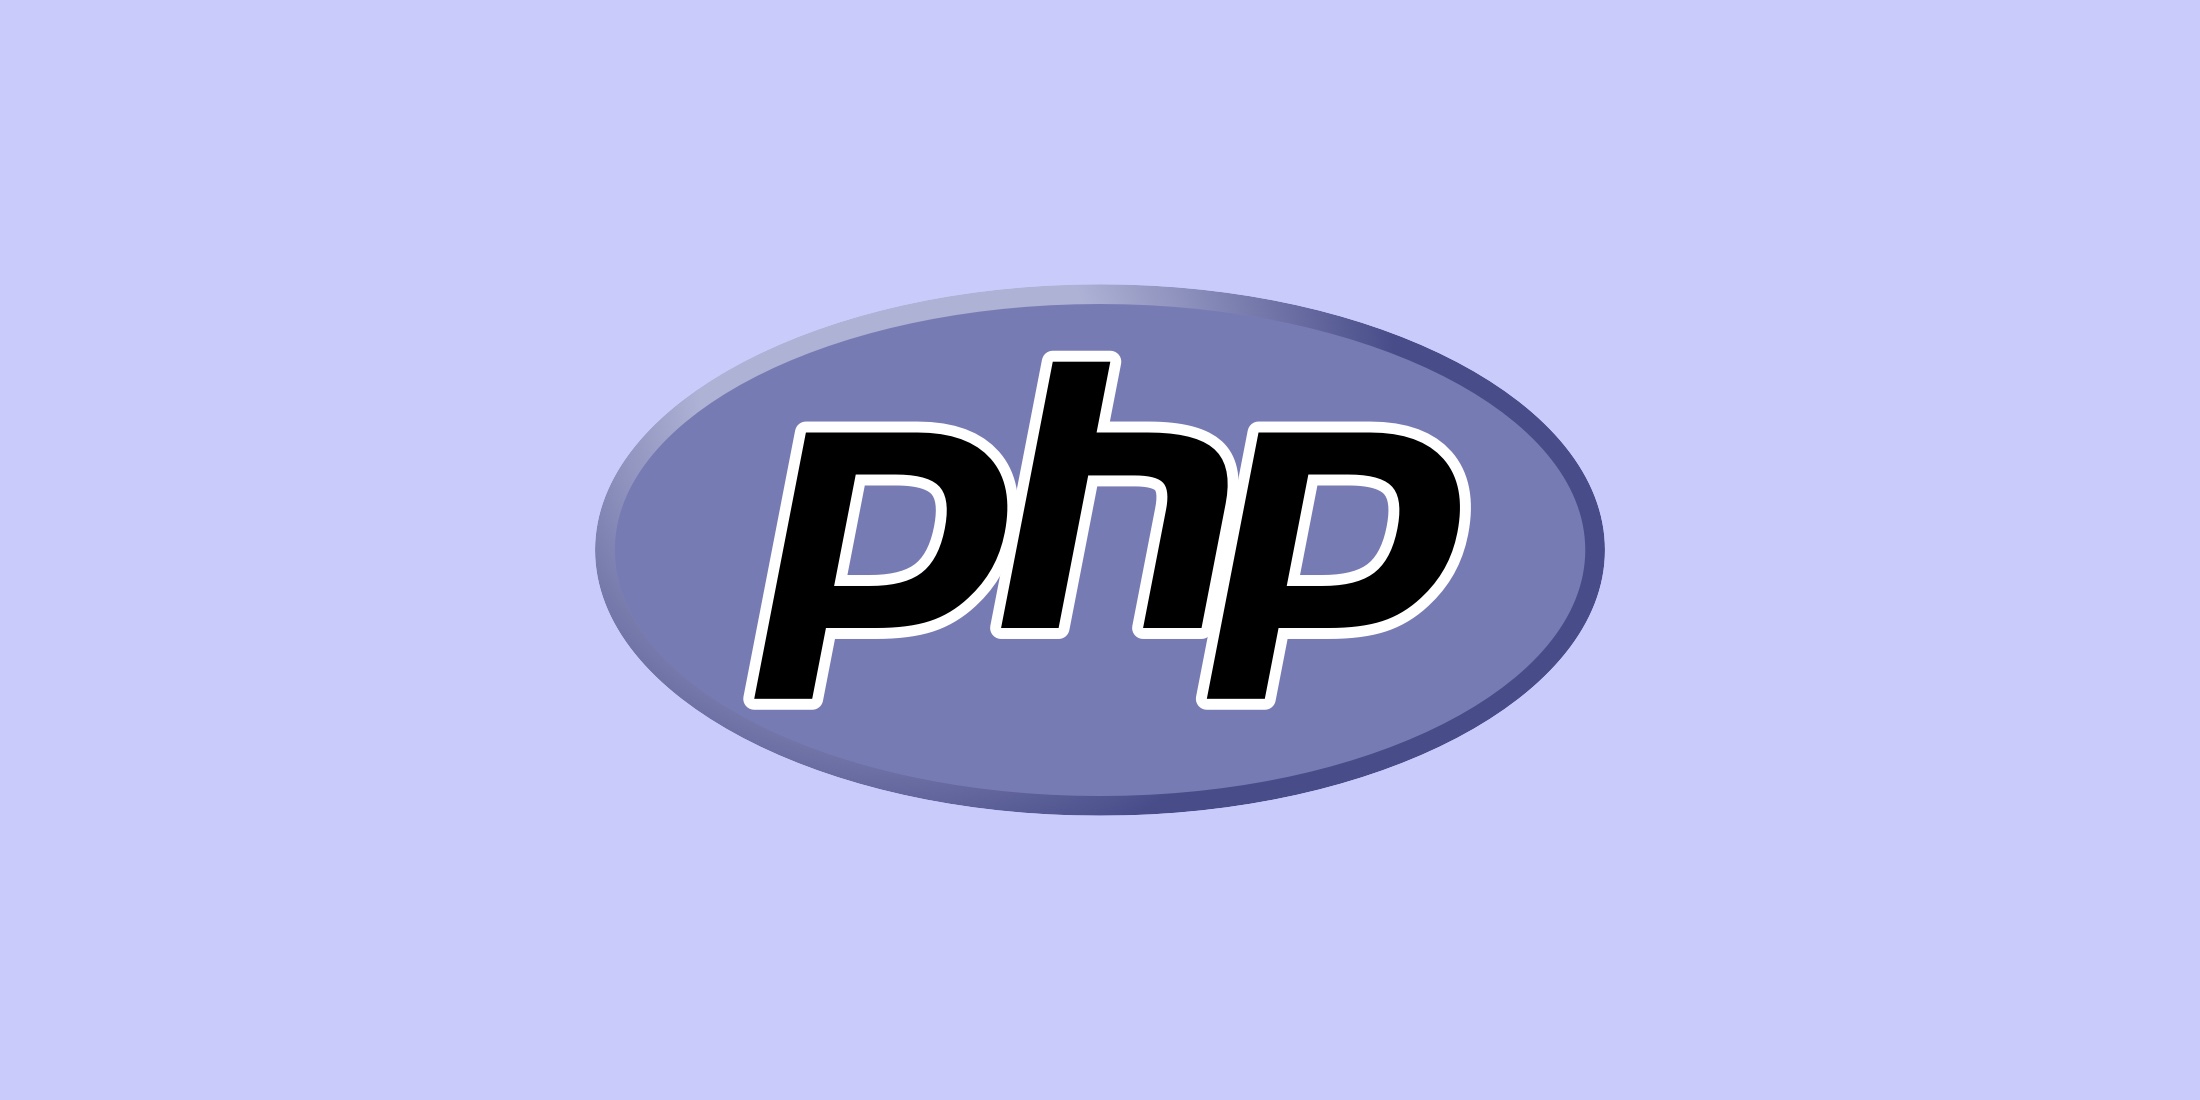 How to Receive WhatsApp messages using PHP?